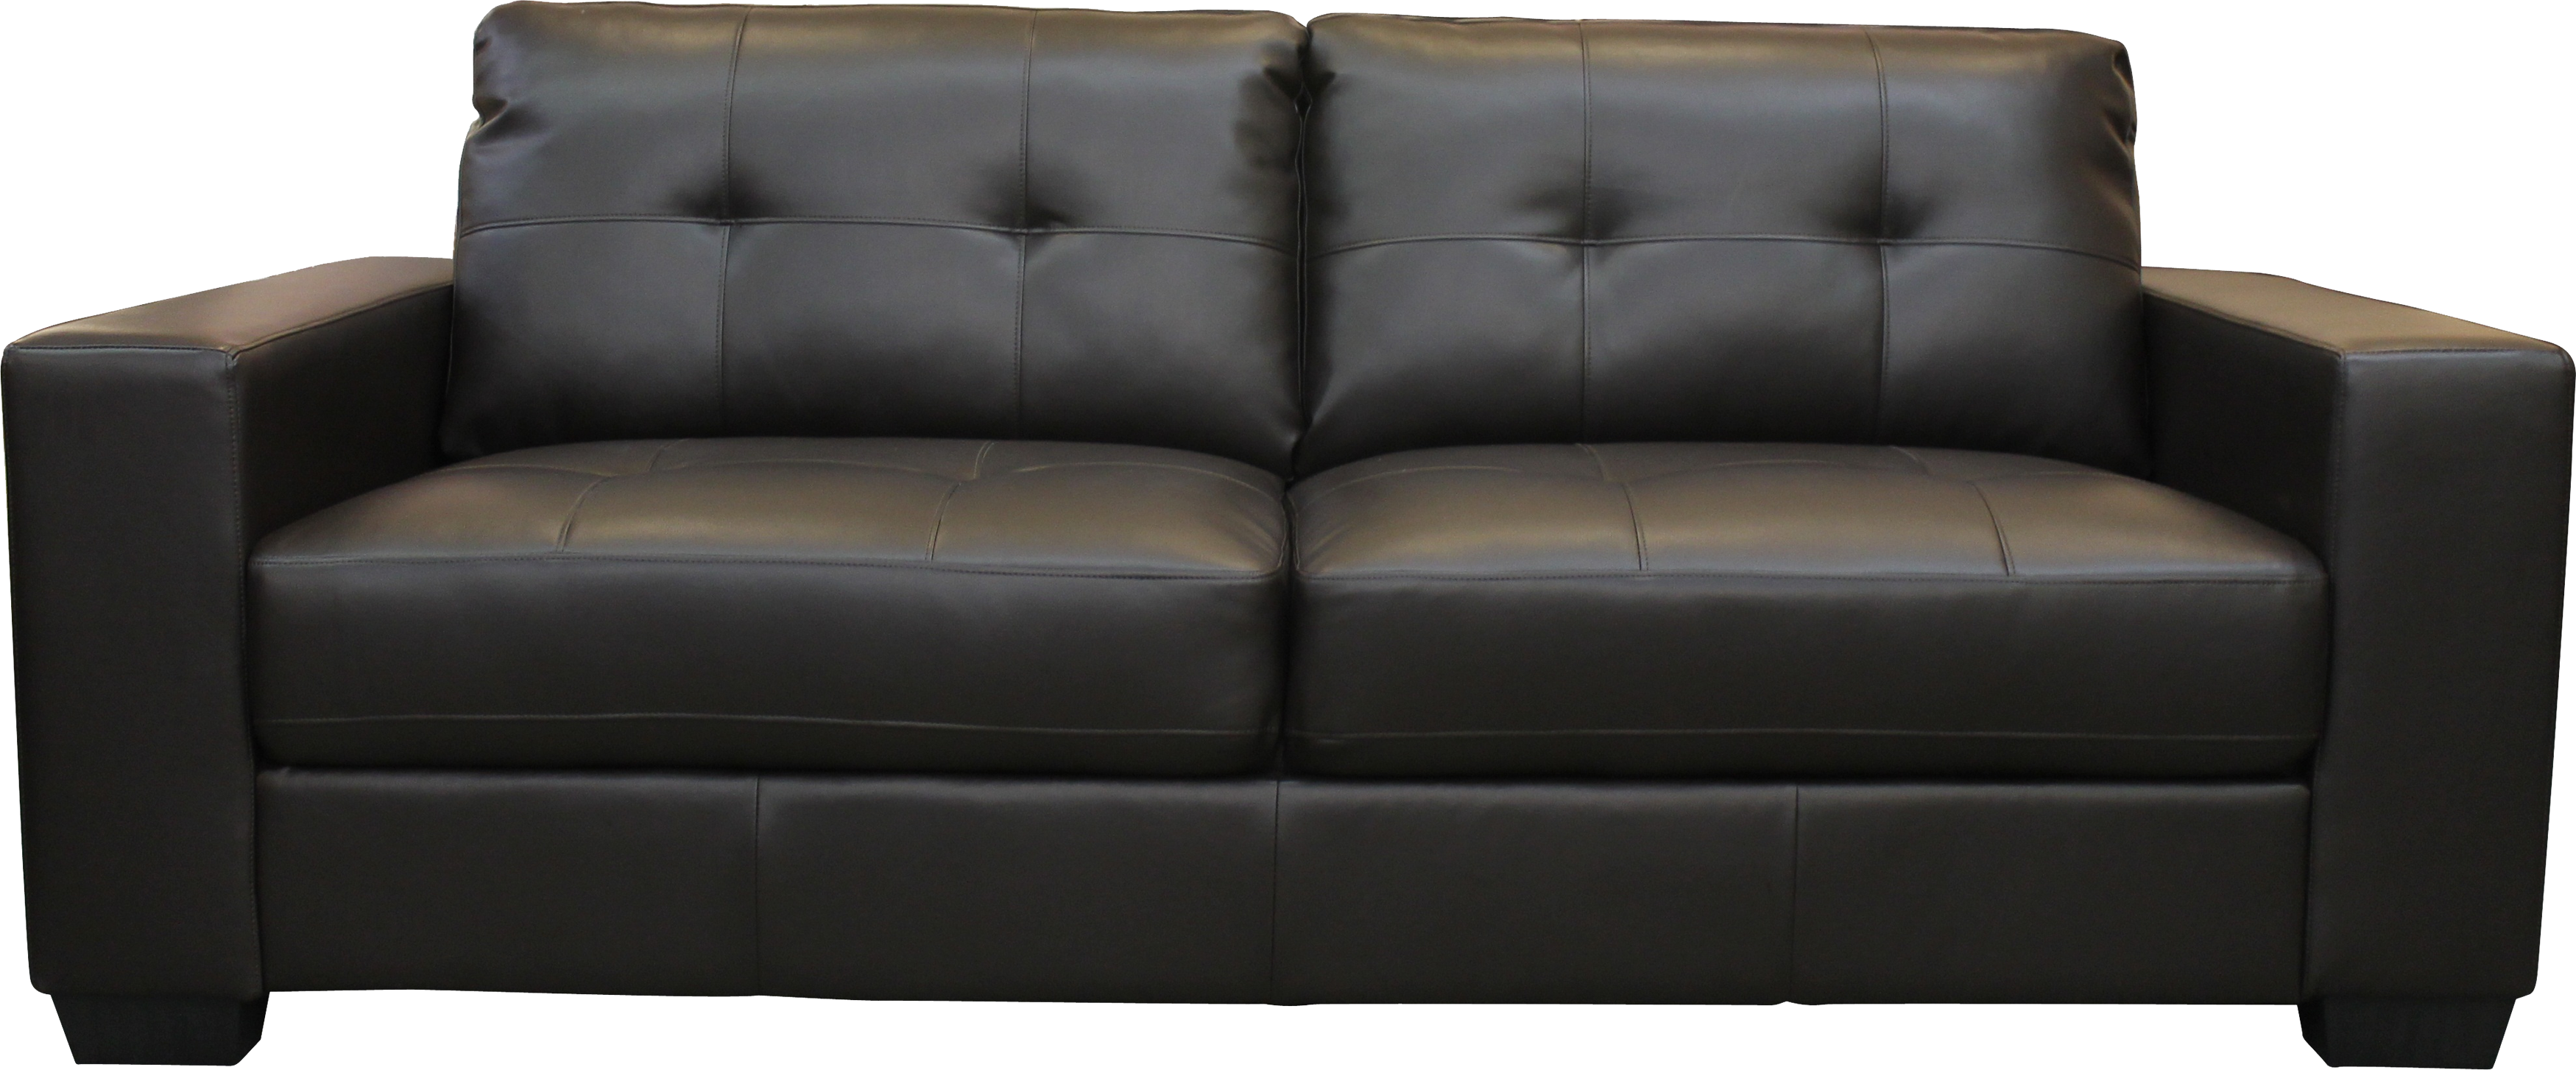 Red sofa PNG image